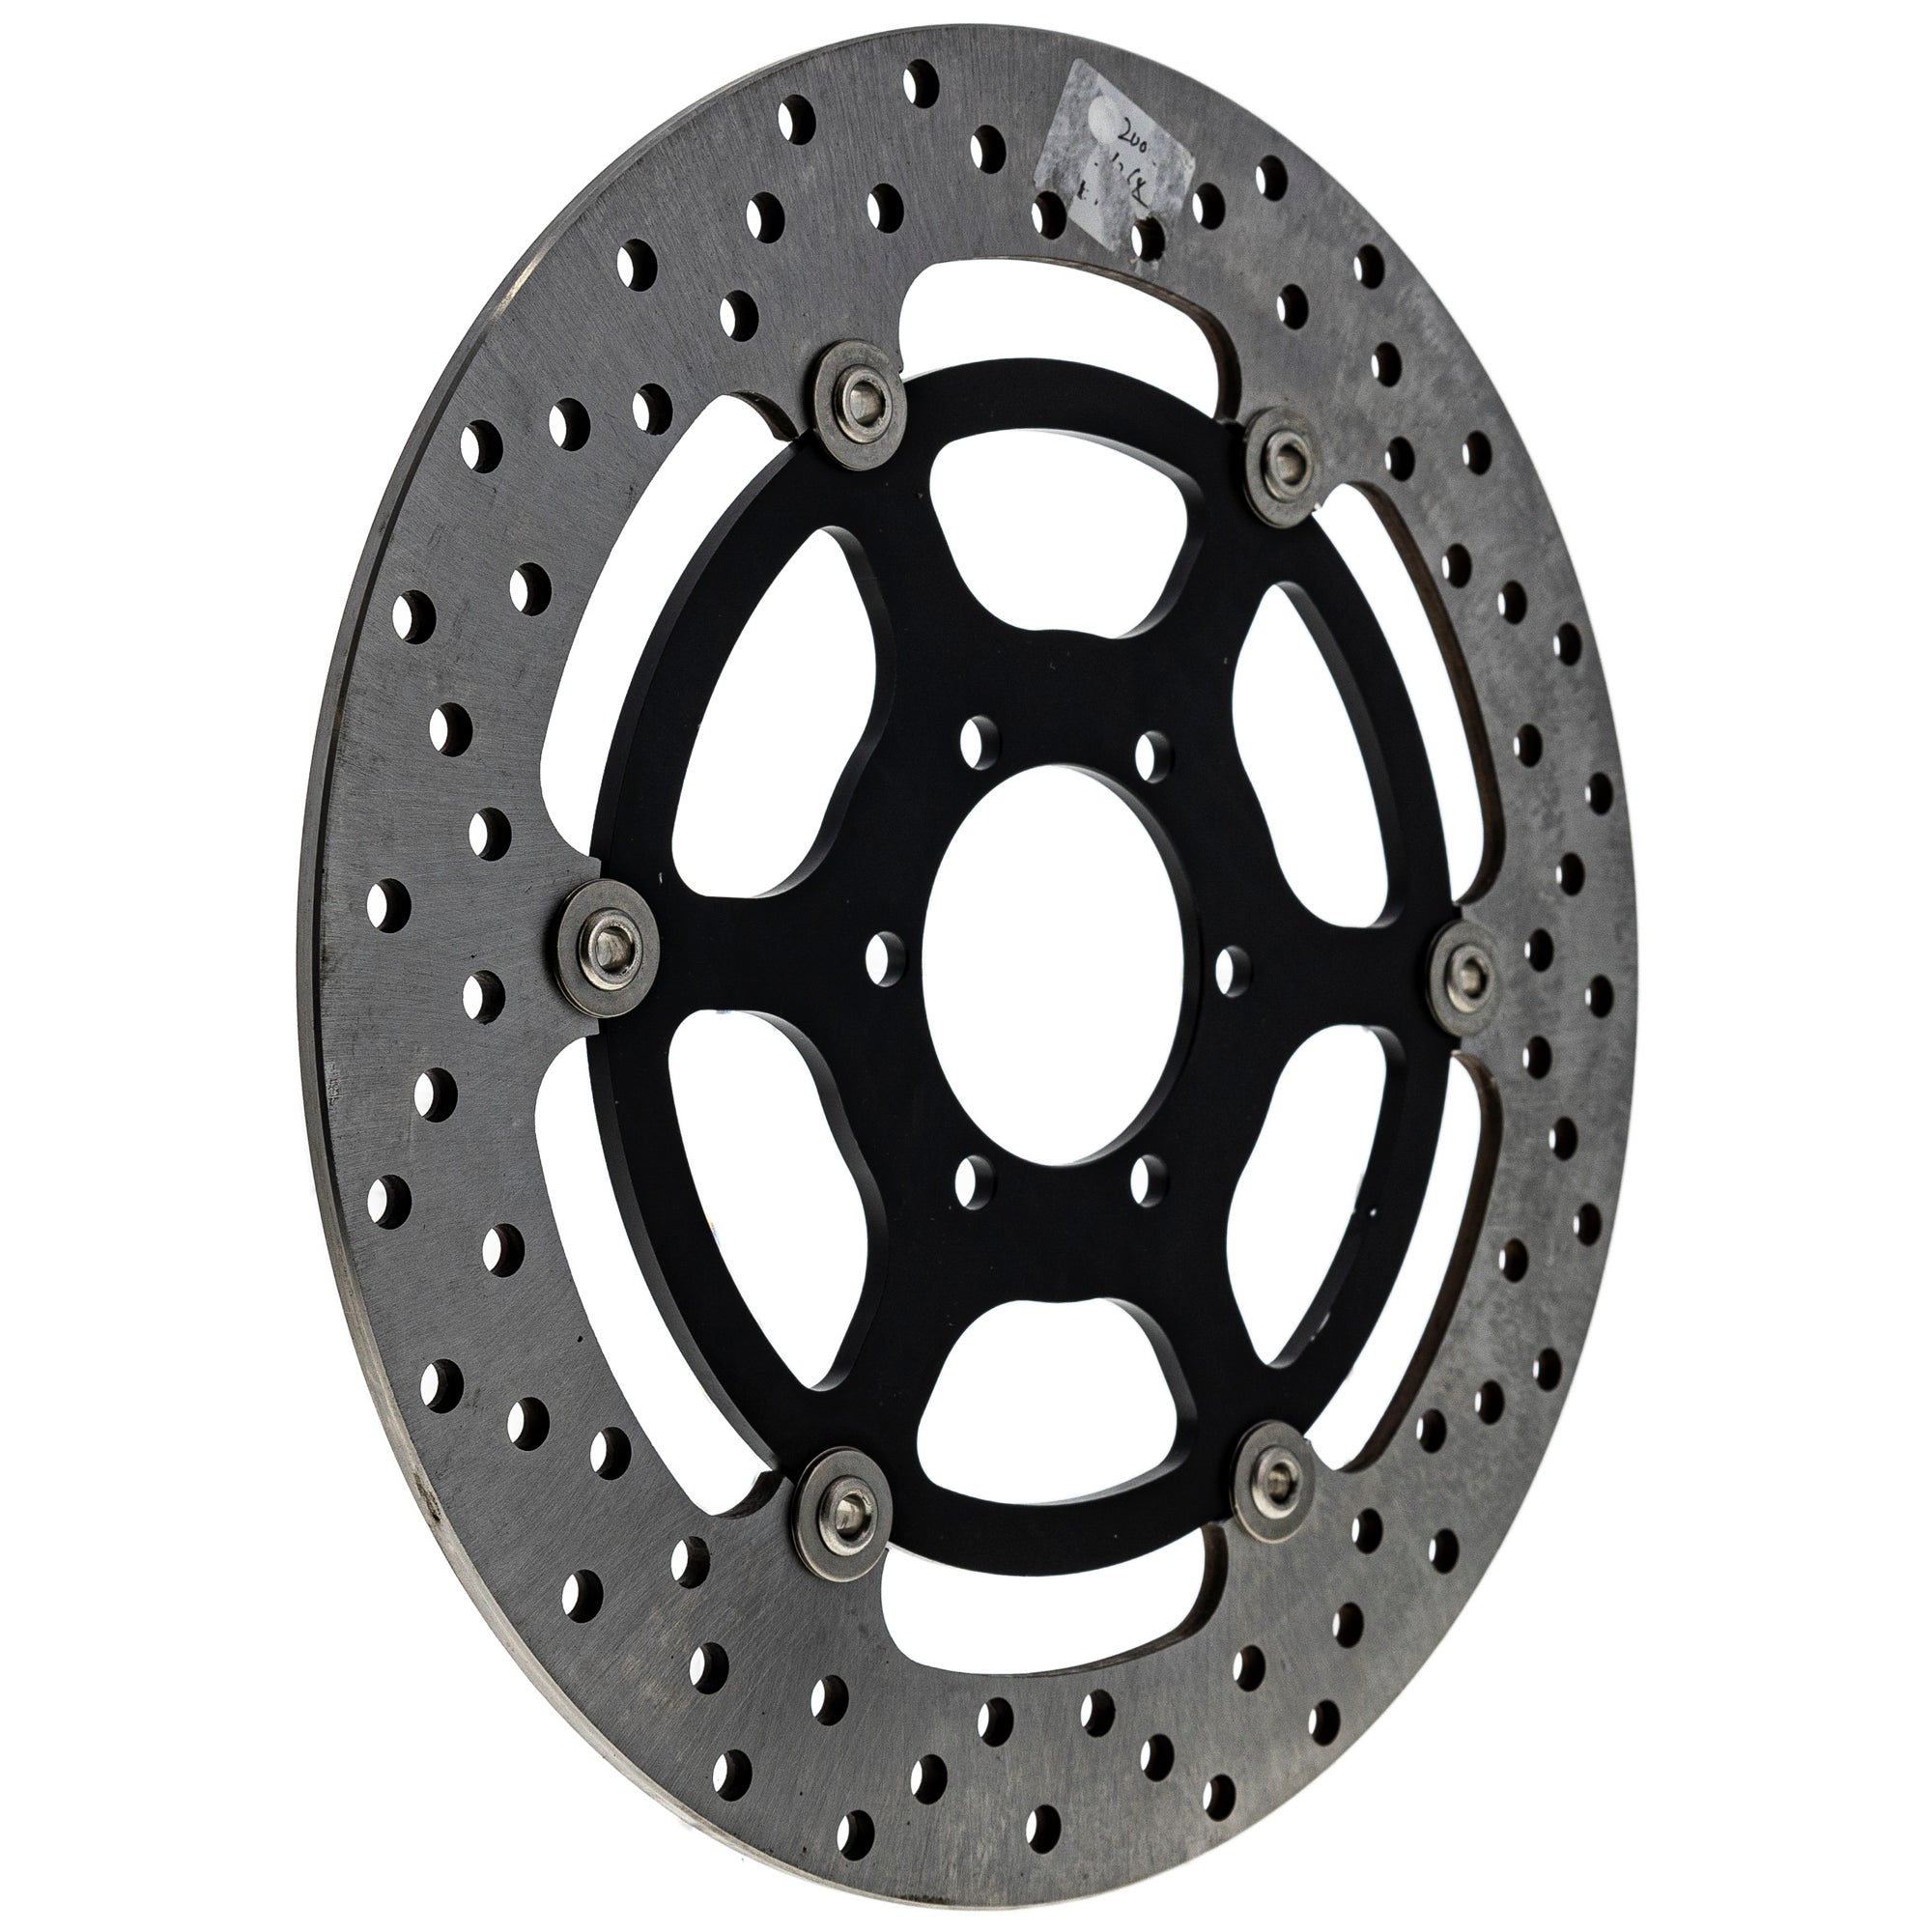 Front Brake Rotors Set 519-CRT2412R For Ducati 49240881A 49240821A 492.4.088.1A 492.4.082.1A | 2-PACK